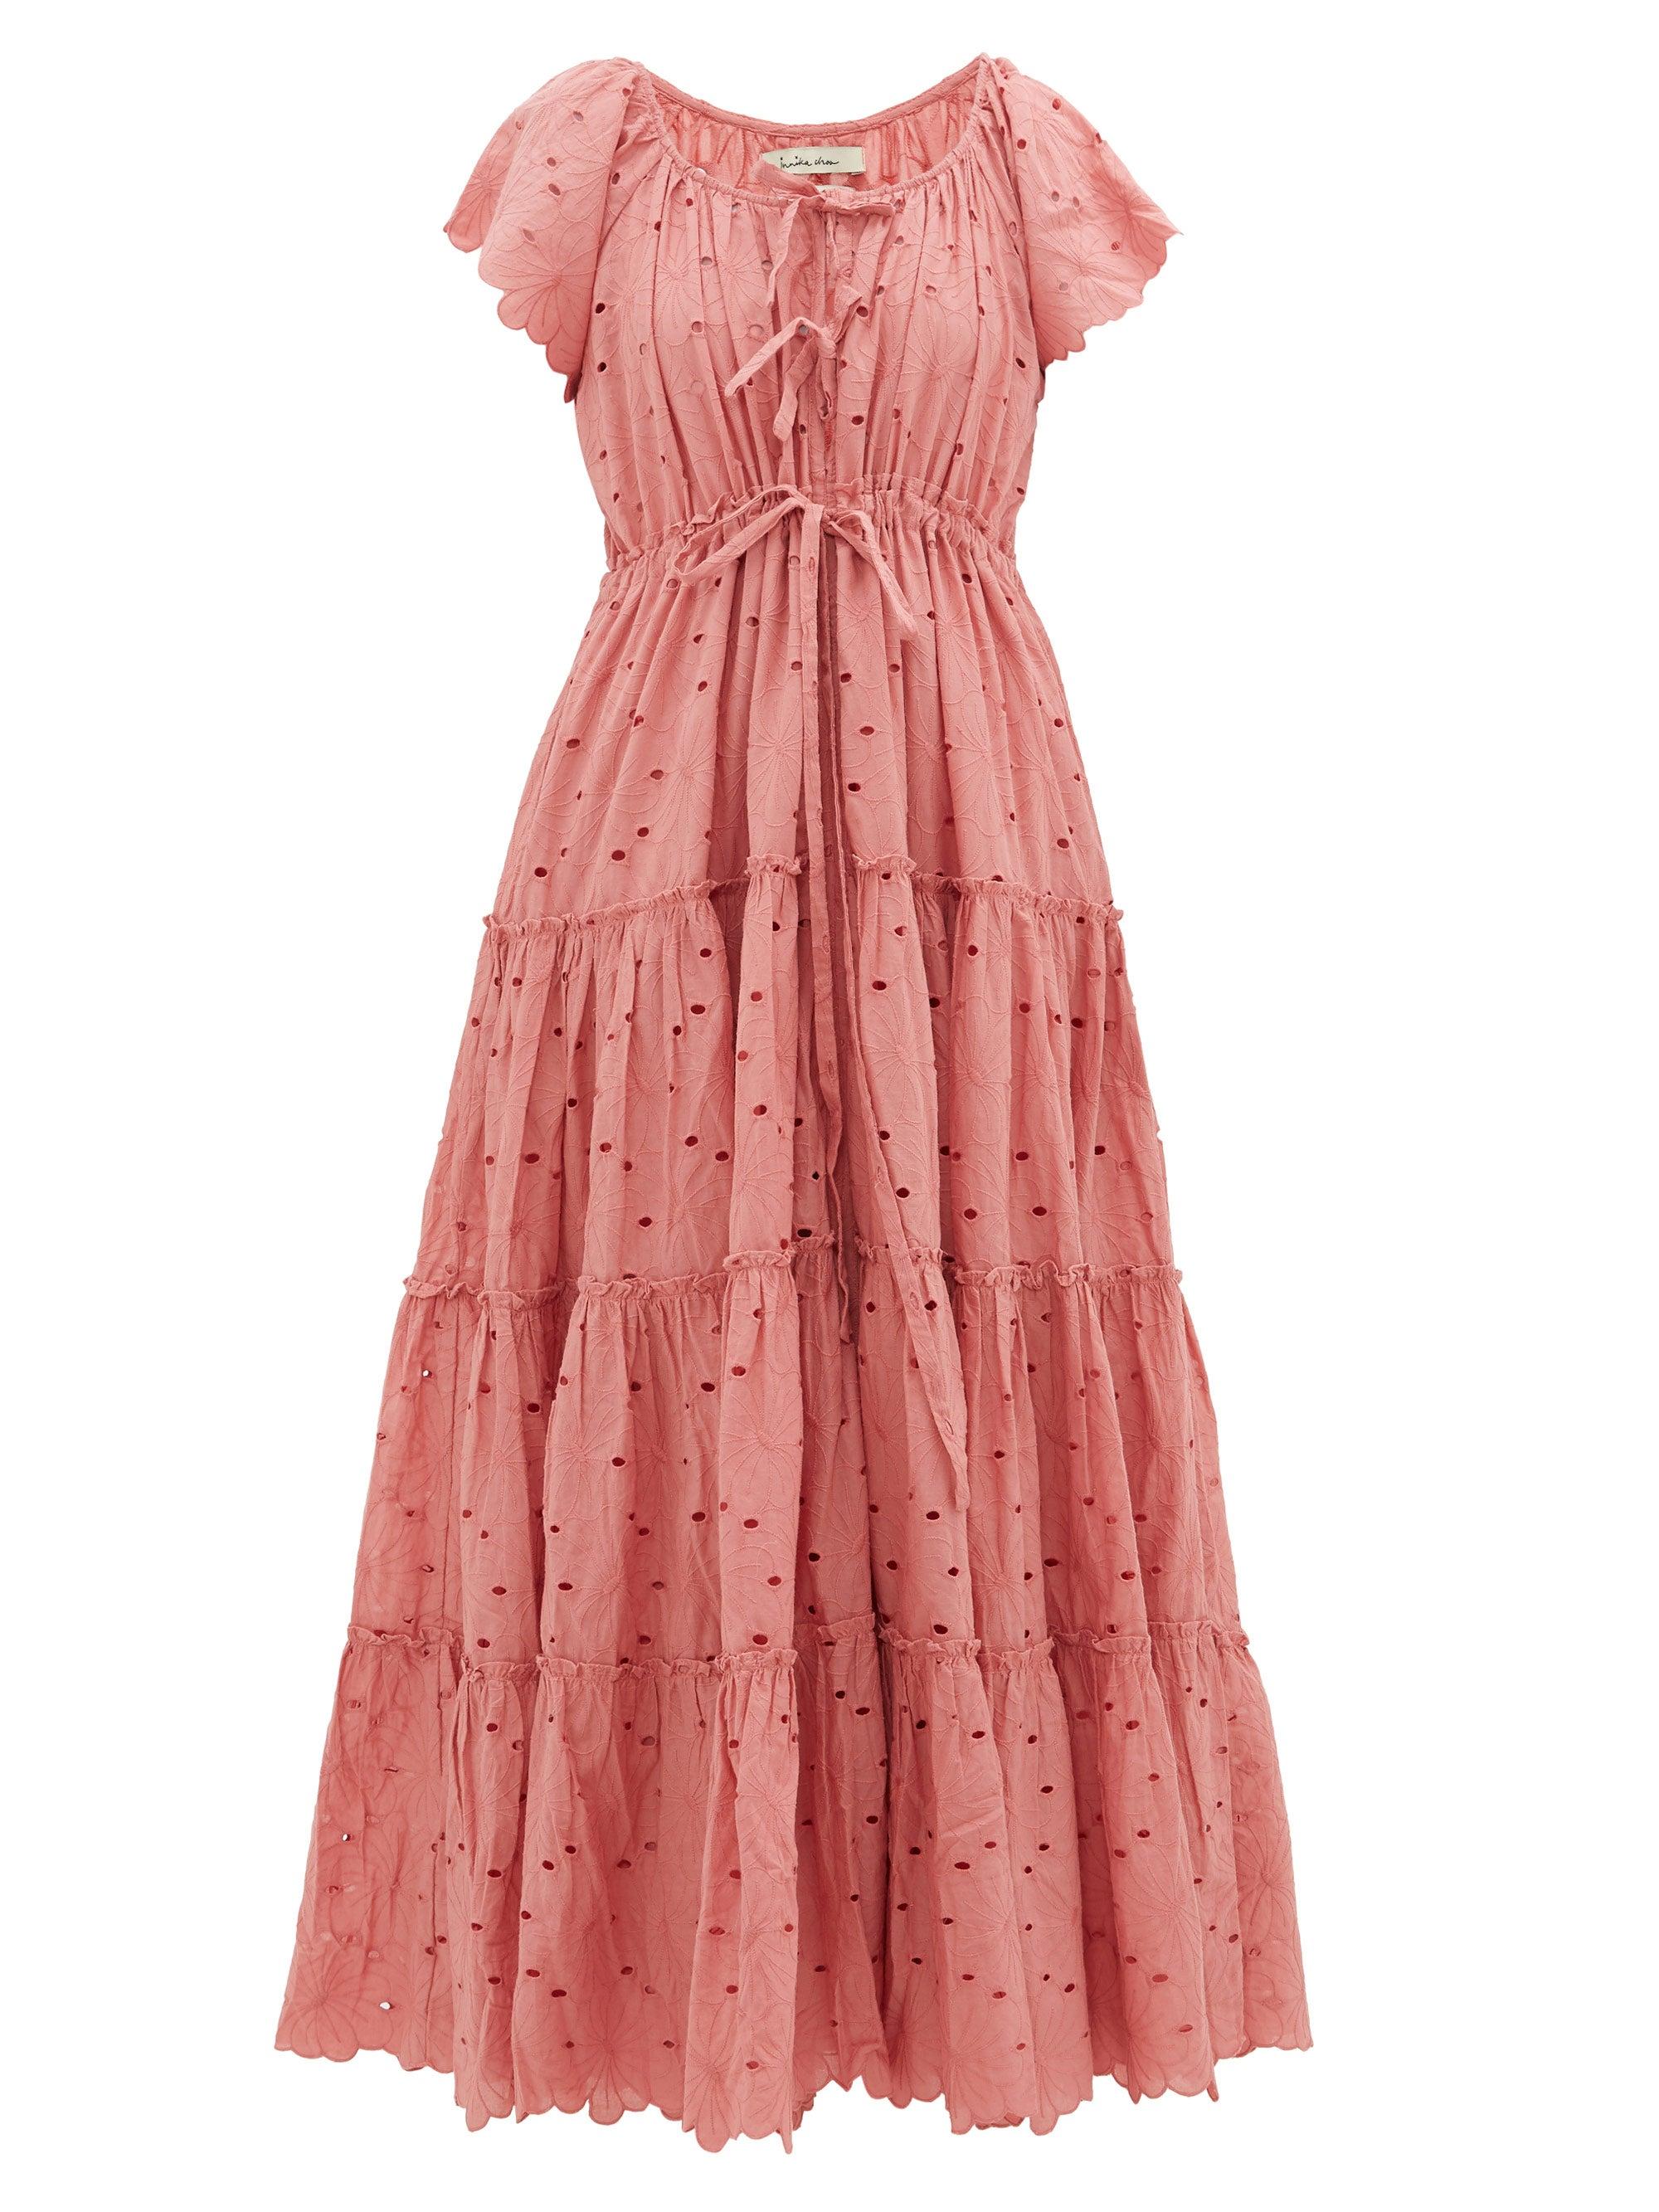 Innika Choo Broderie-anglaise Cotton Dress in Pink - Lyst